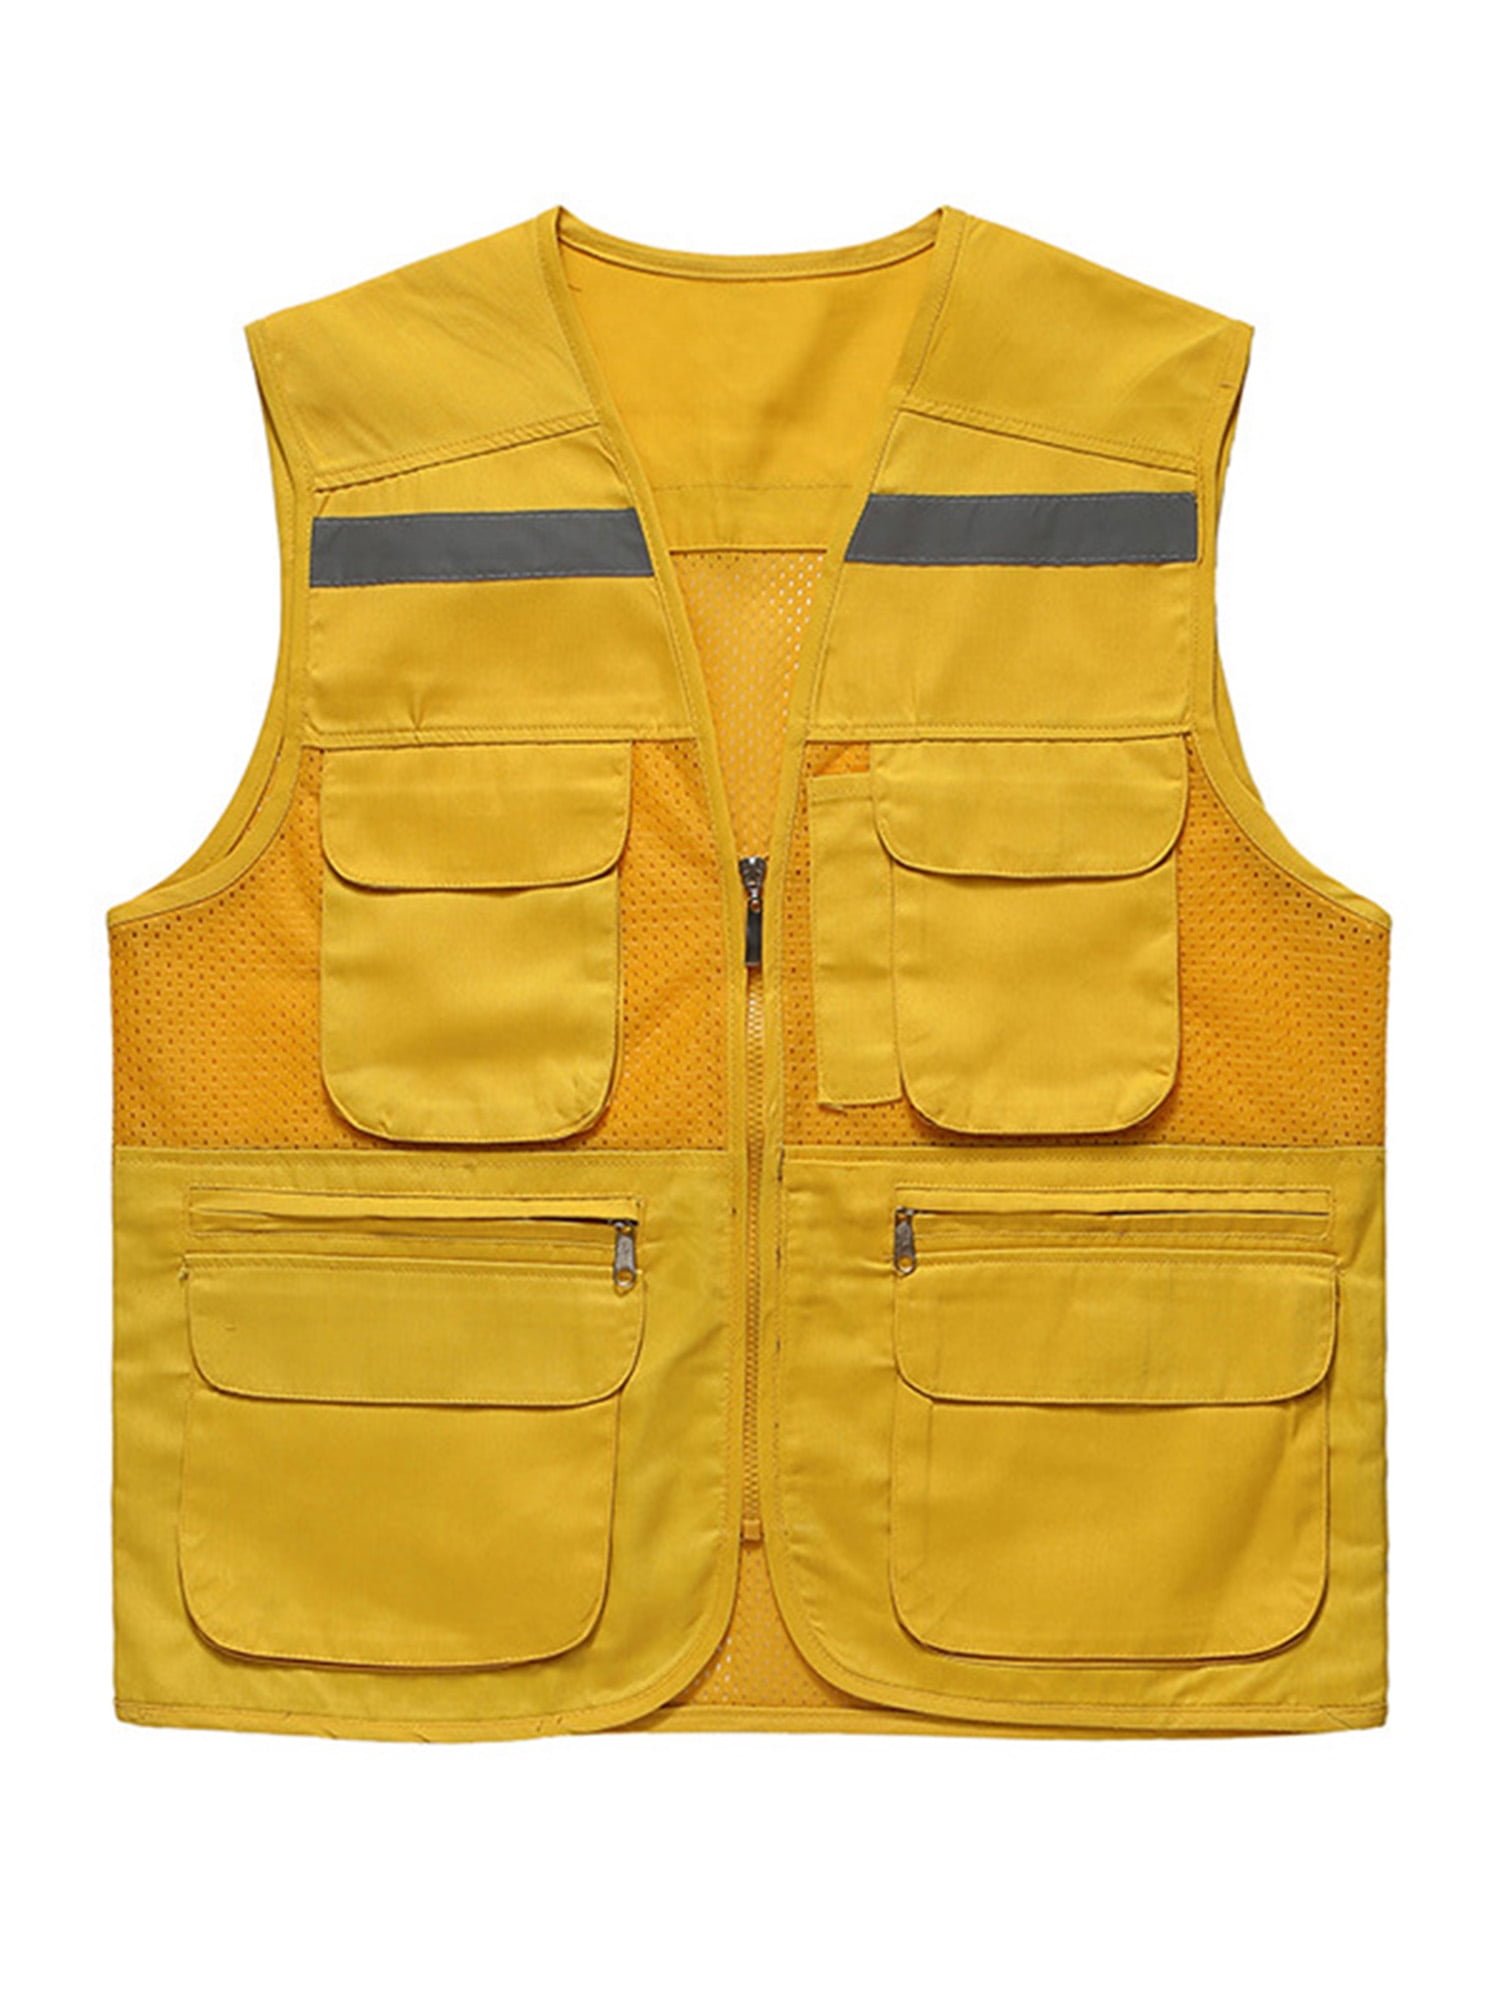 Wrcnote Women Jacket WorkWear High Visibility Vest Breathable Outdoor ...